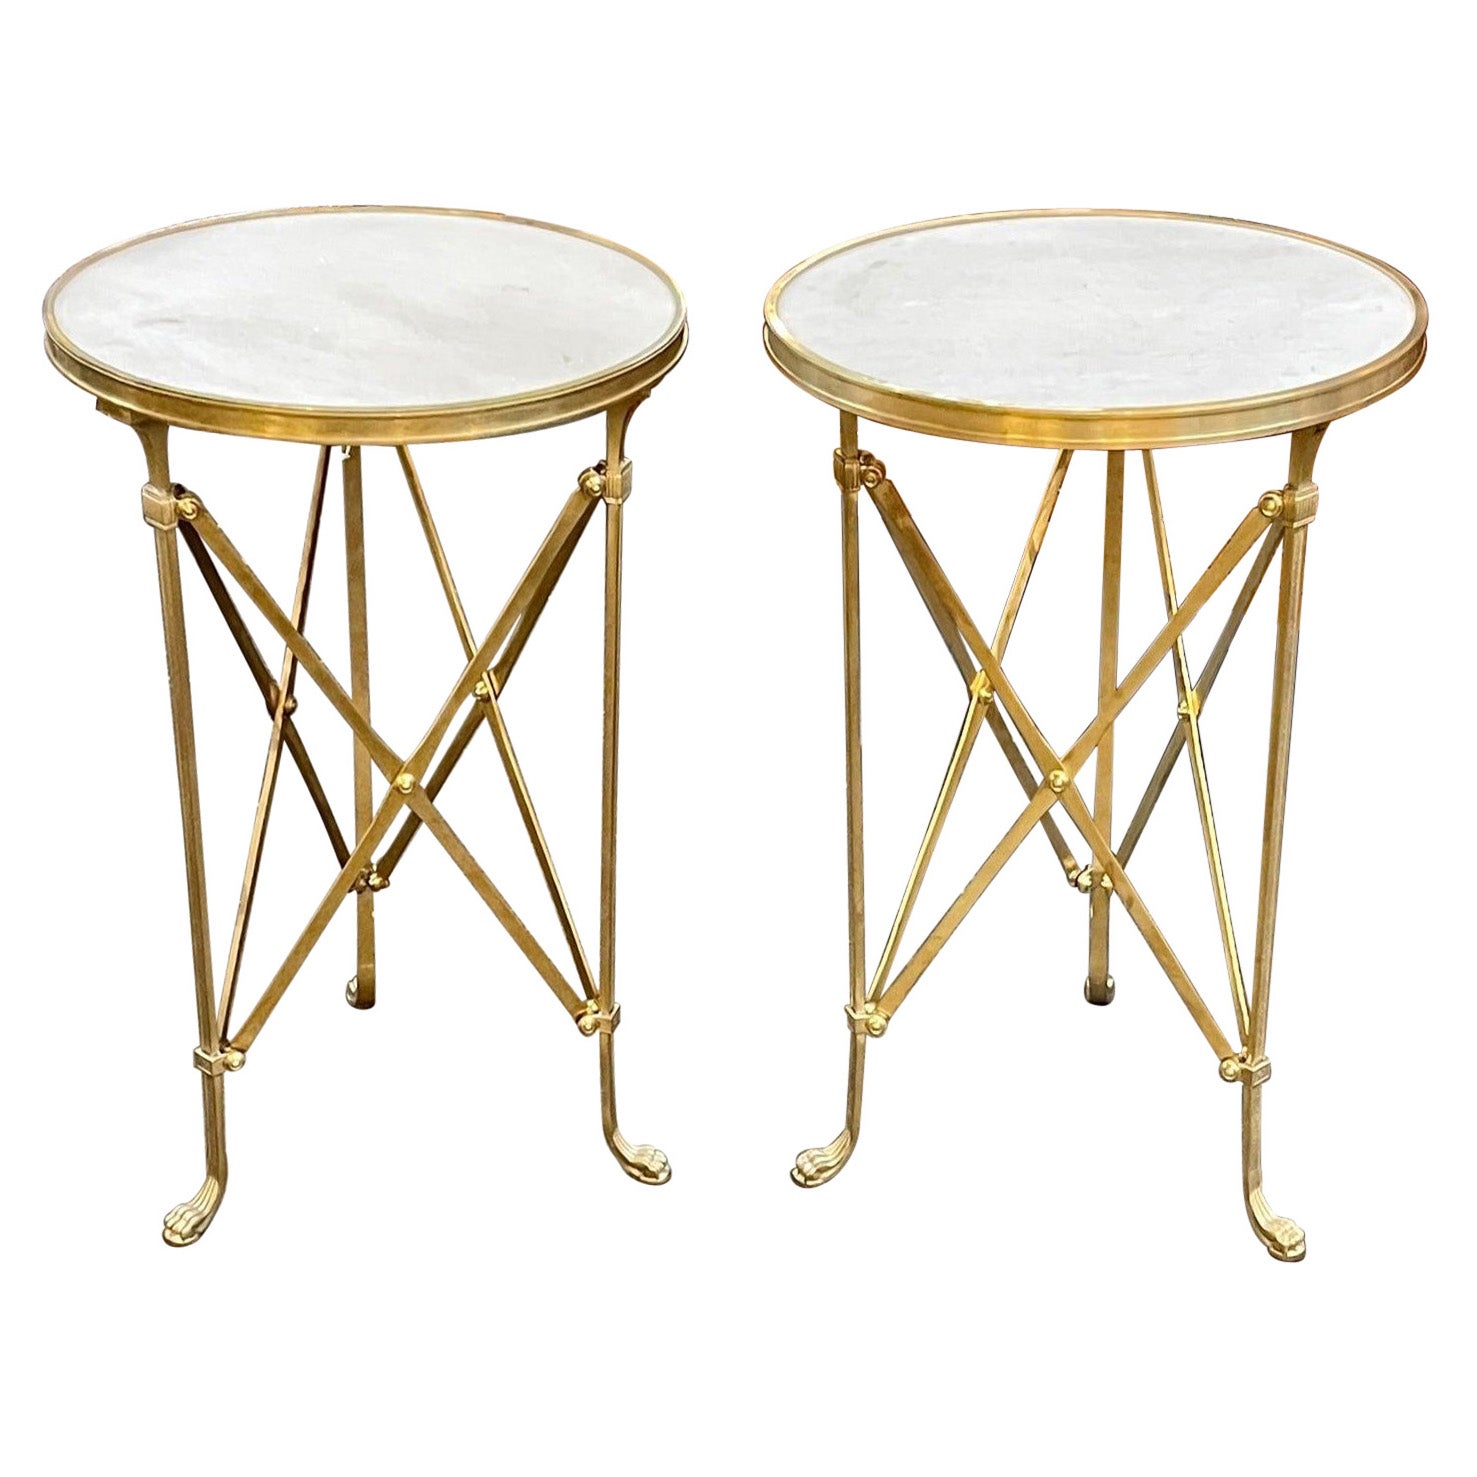 Pair of French Directoire Style Gilt Bronze and Marble Side Tables For Sale